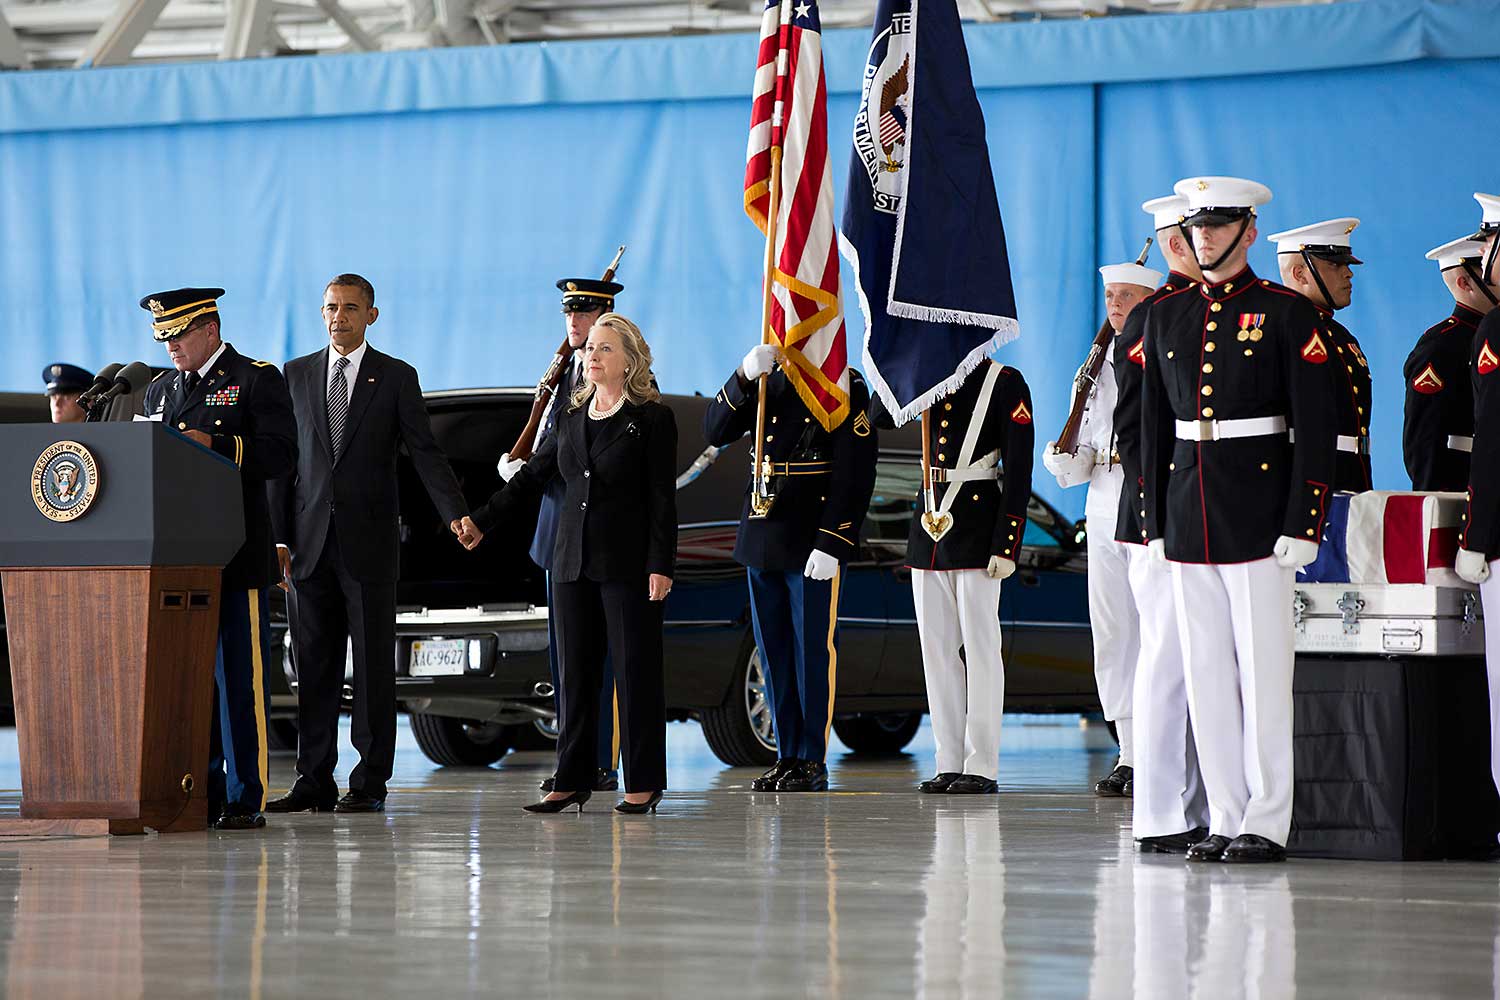 President Barack Obama, Vice President Joe Biden and Secretary of State Hillary Rodham Clinton attend the dignified transfer at Joint Base Andrews, Maryland, Sept. 14, 2012, of J. Christopher Stevens, U.S. Ambassador to Libya; Sean Smith, Information Management Officer; and Security Personnel Glen Doherty and Tyrone Woods, who were killed in the attack on the U.S. Consulate in Benghazi, Libya.